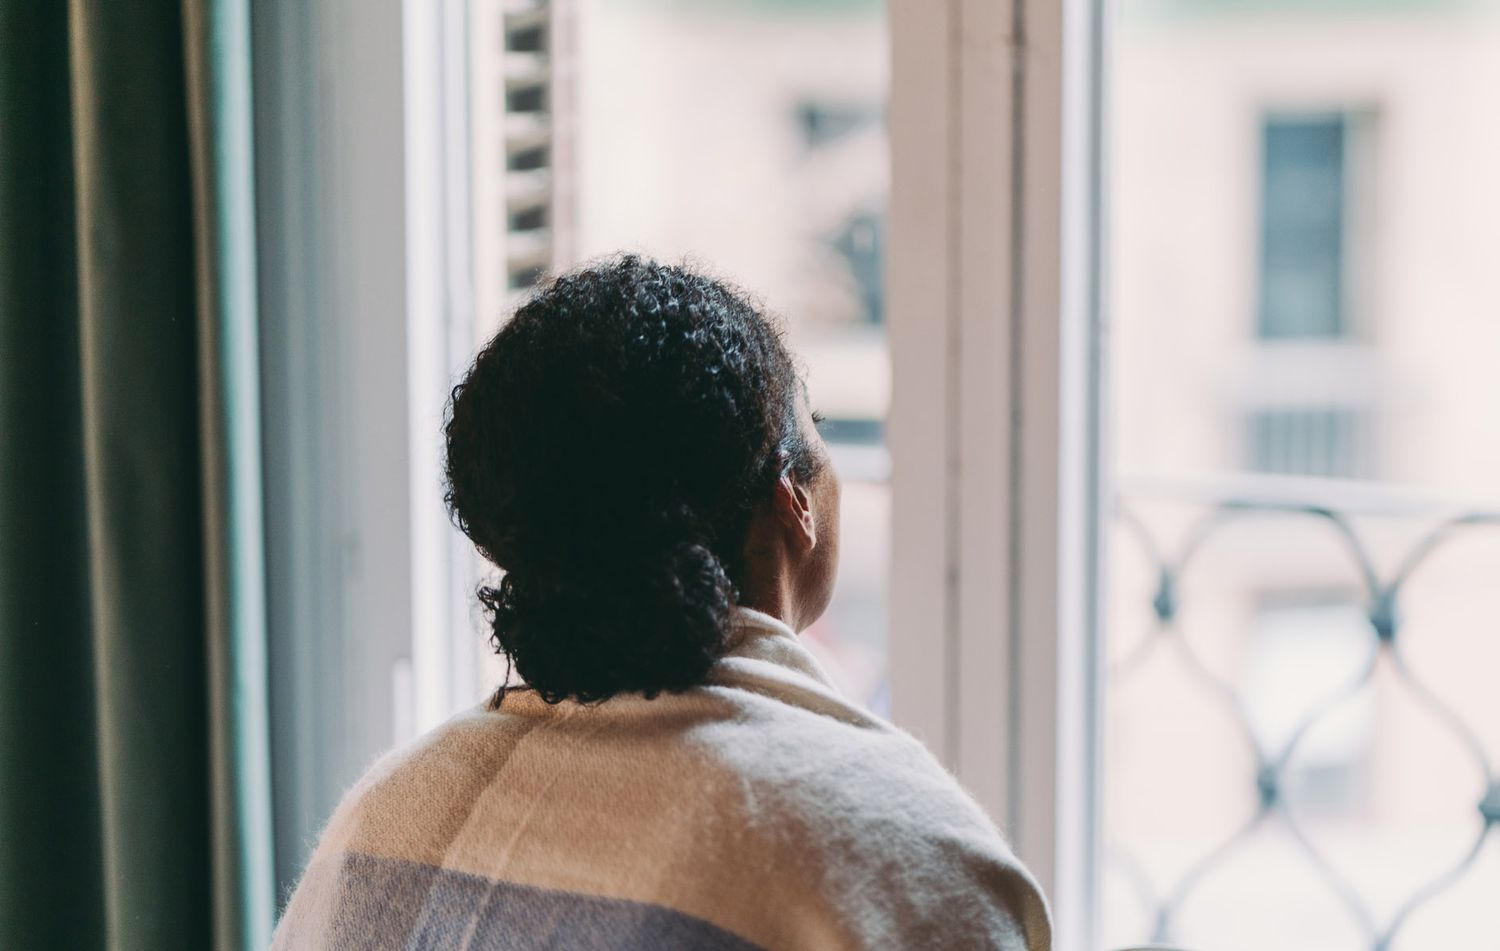 An image of a woman looking out a window.